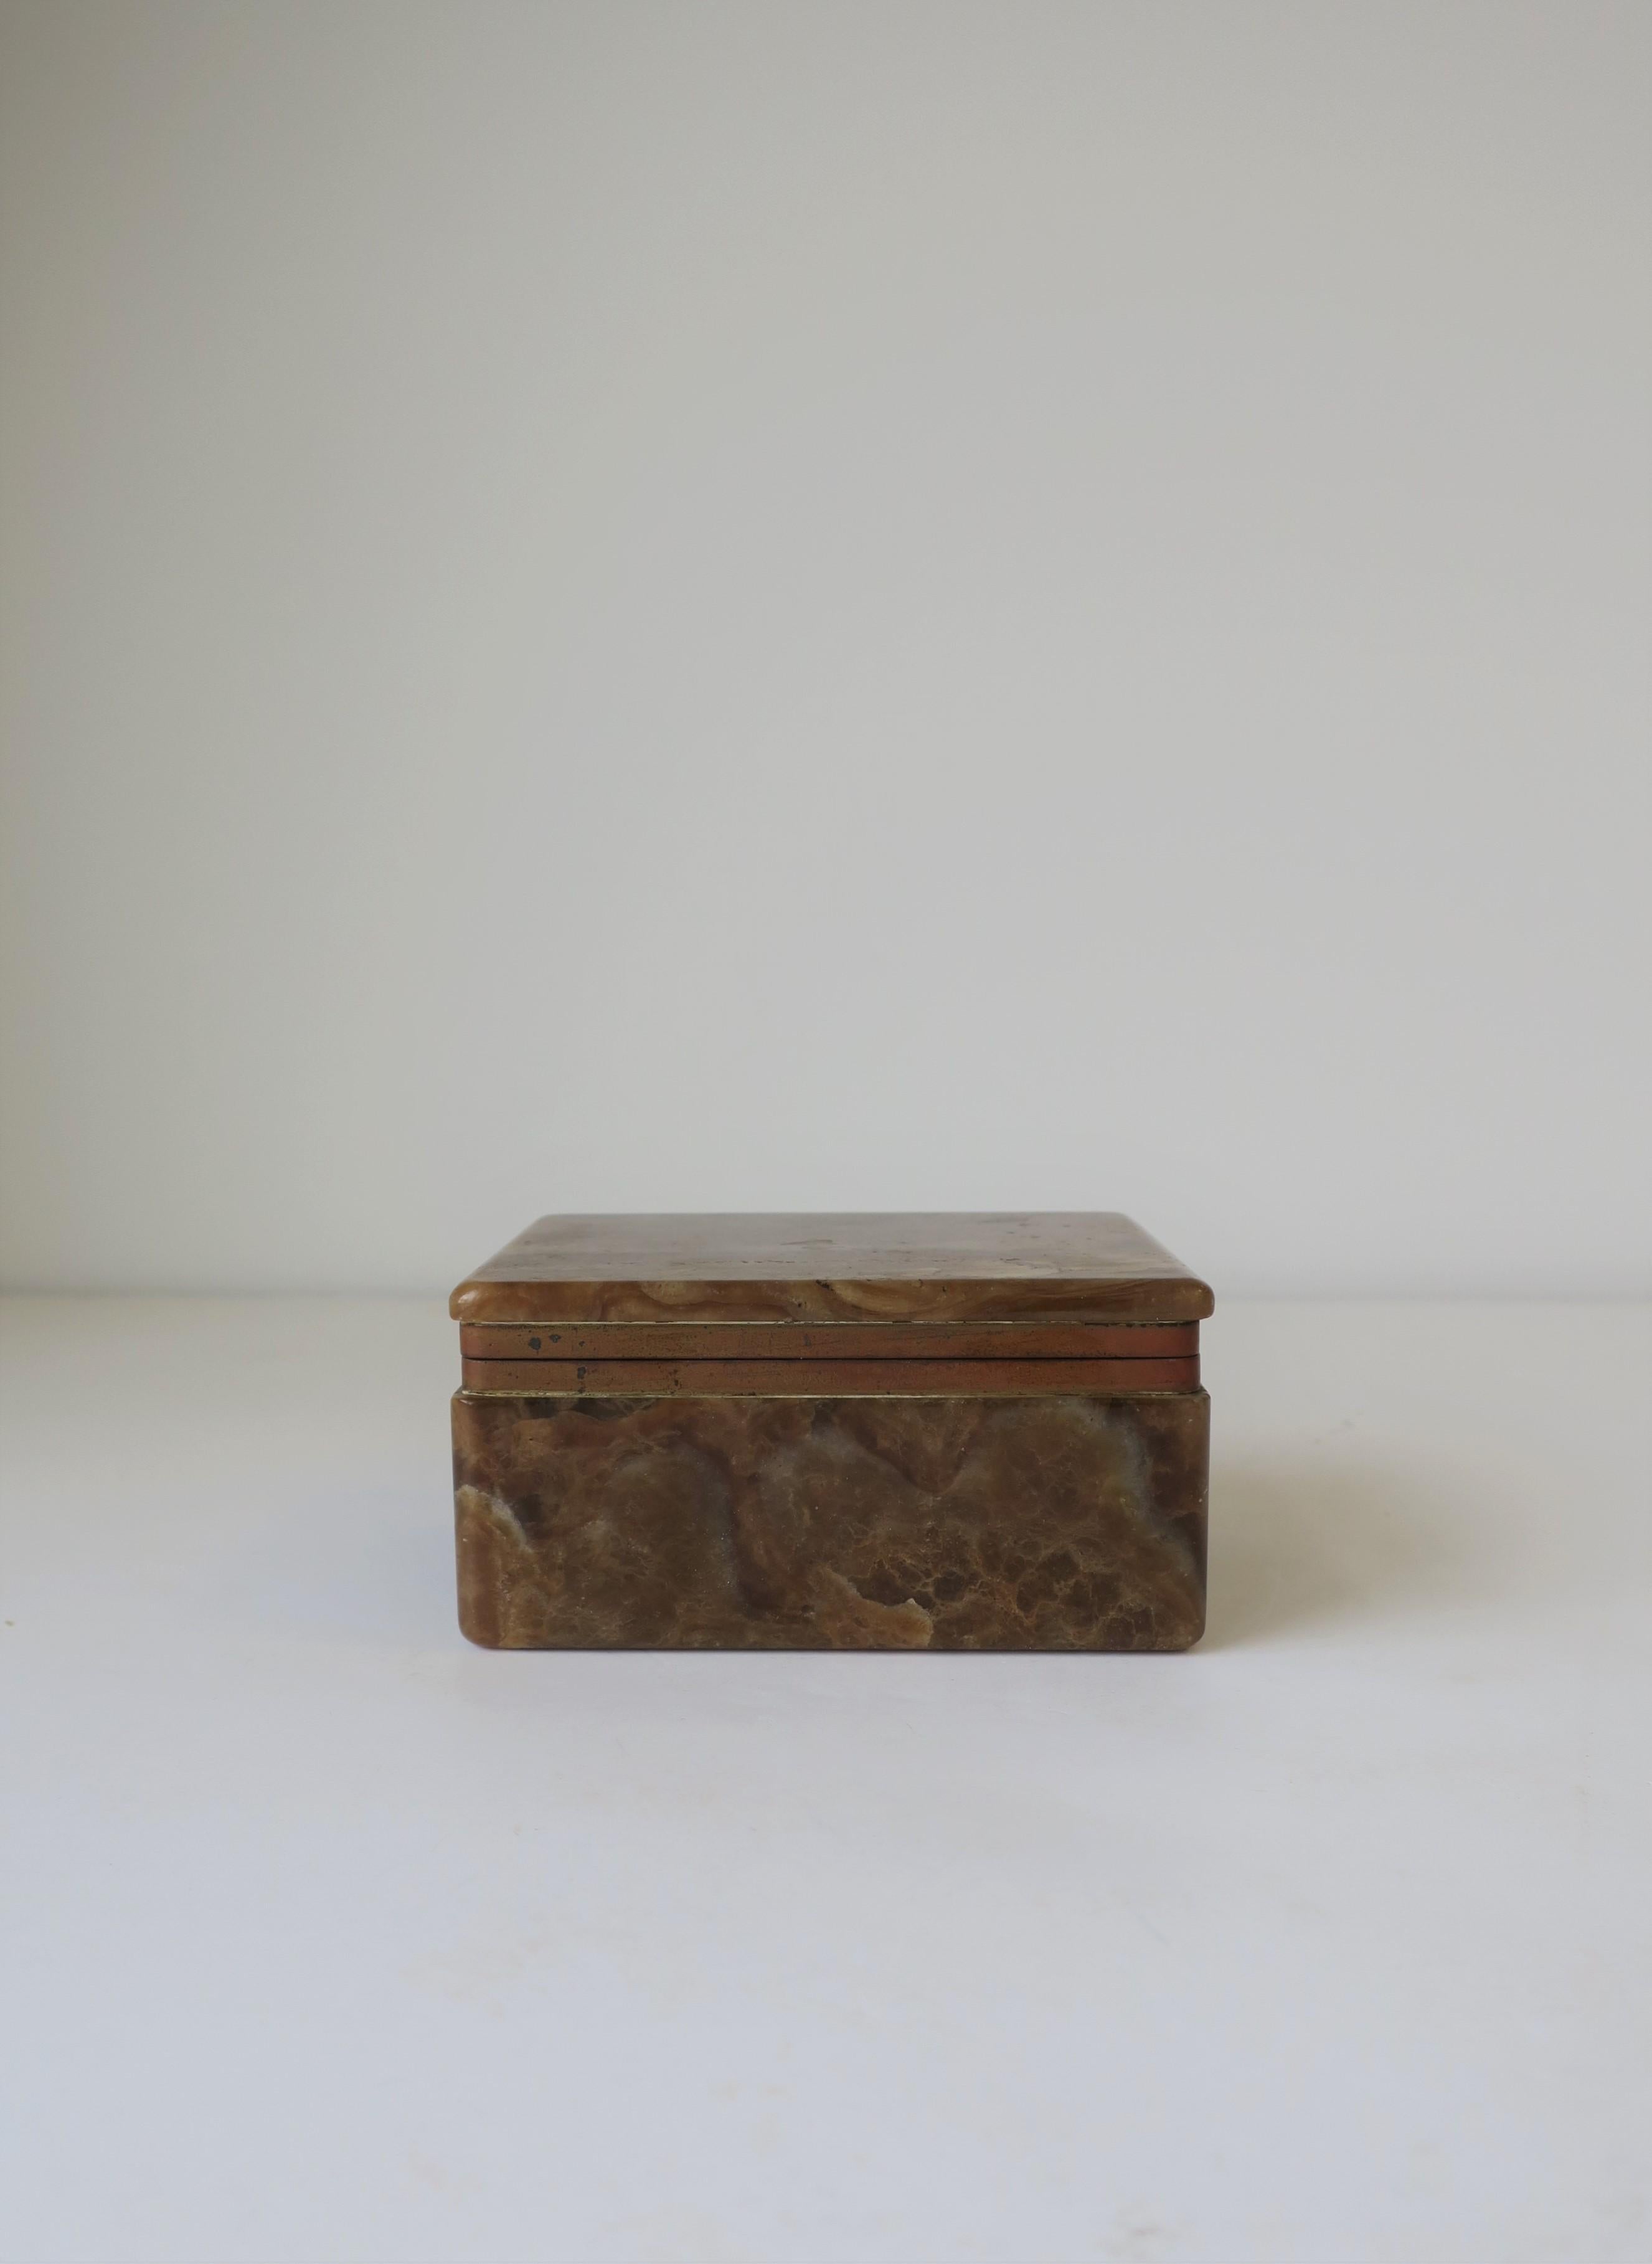 A very beautiful, substantial and chic Belgian modern brown, caramel, and white onyx marble and brass hinged box, circa early to mid-20th century, Belgium. Box is rectangular in shape and can hold jewelry (as demonstrated) or other small items on a